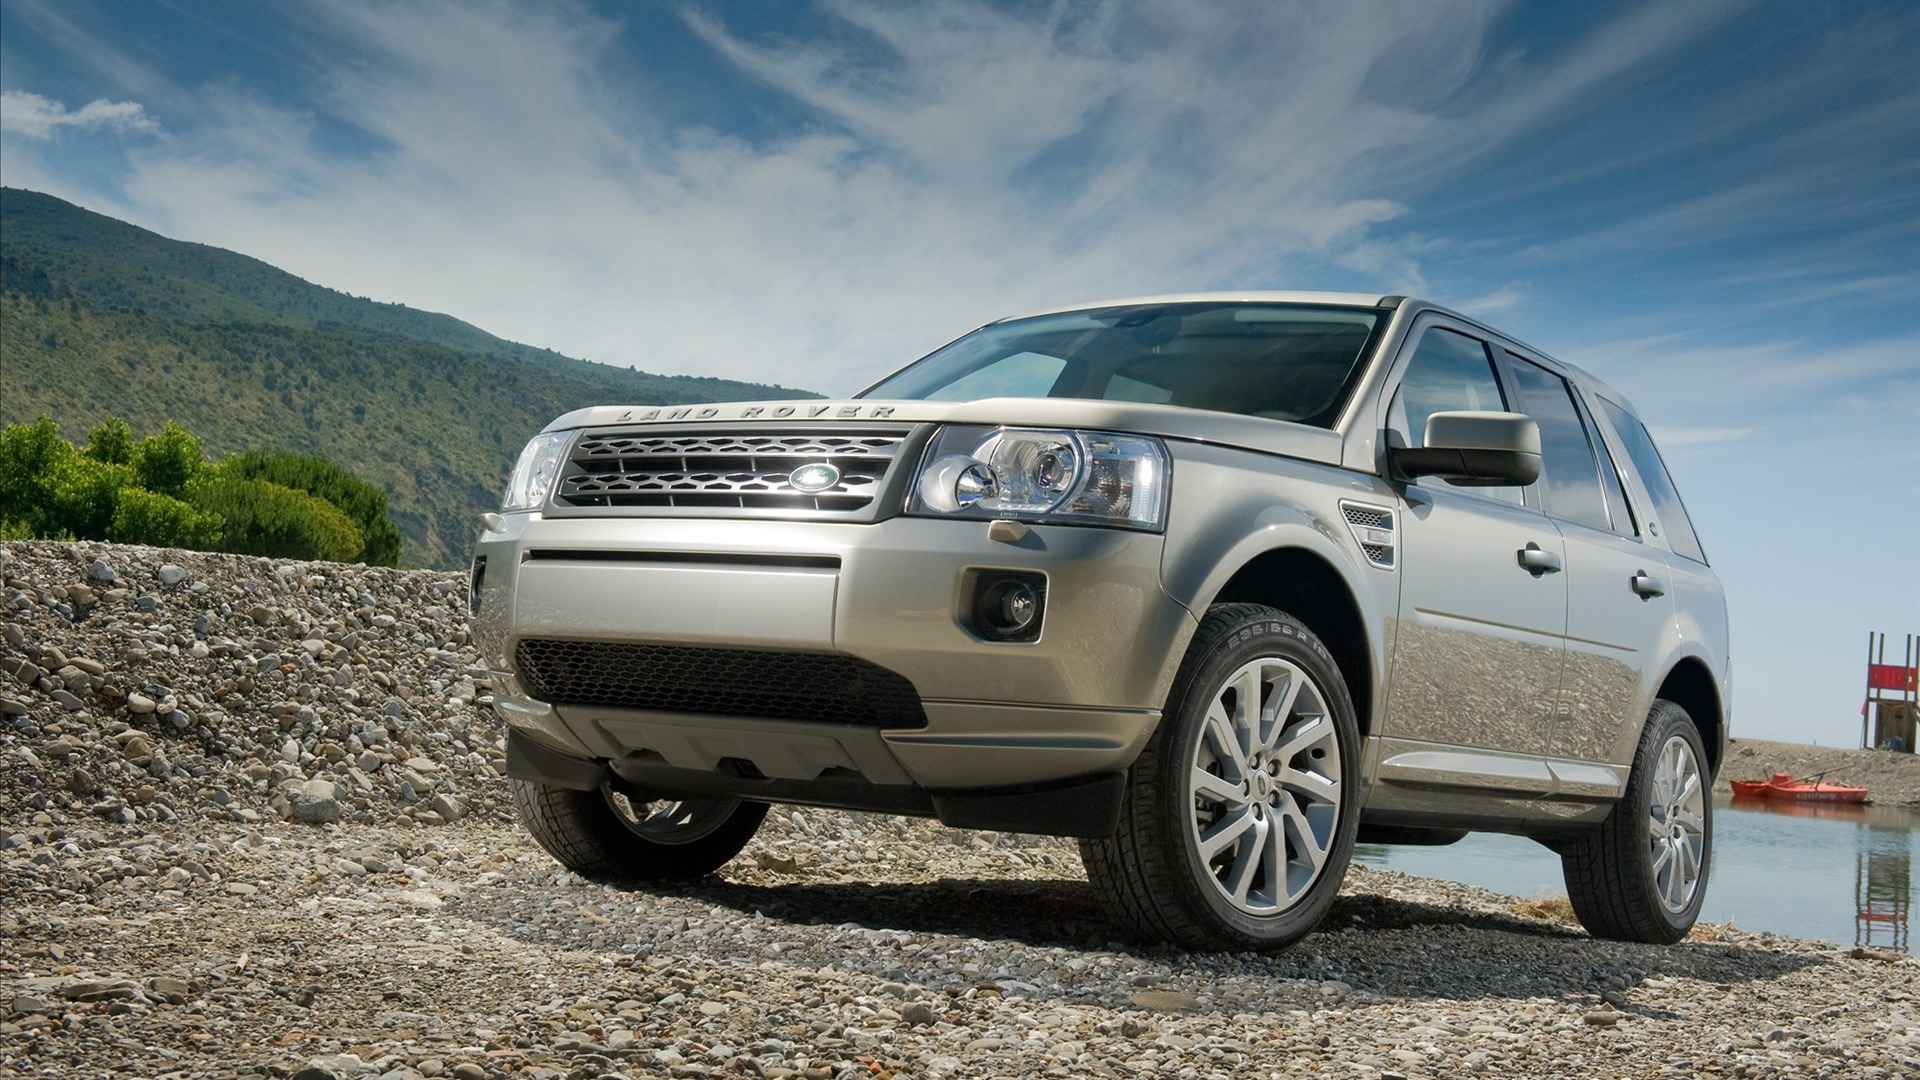 Land Rover wallpapers 2011 (1) #5 - 1920x1080